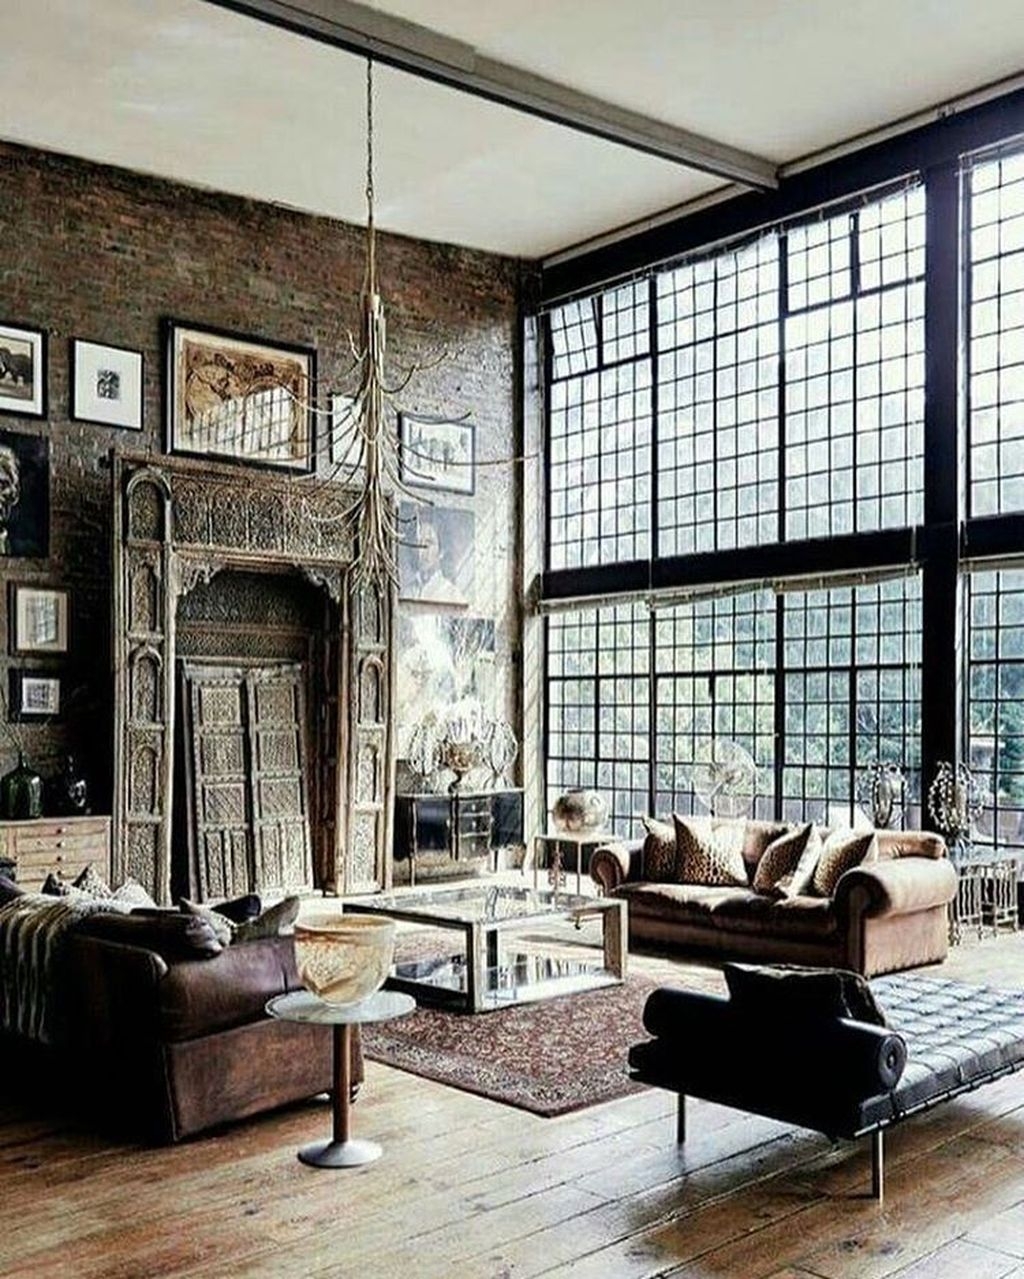 Fabulous Industrial Loft Make Over Ideas For Trendy Home 38